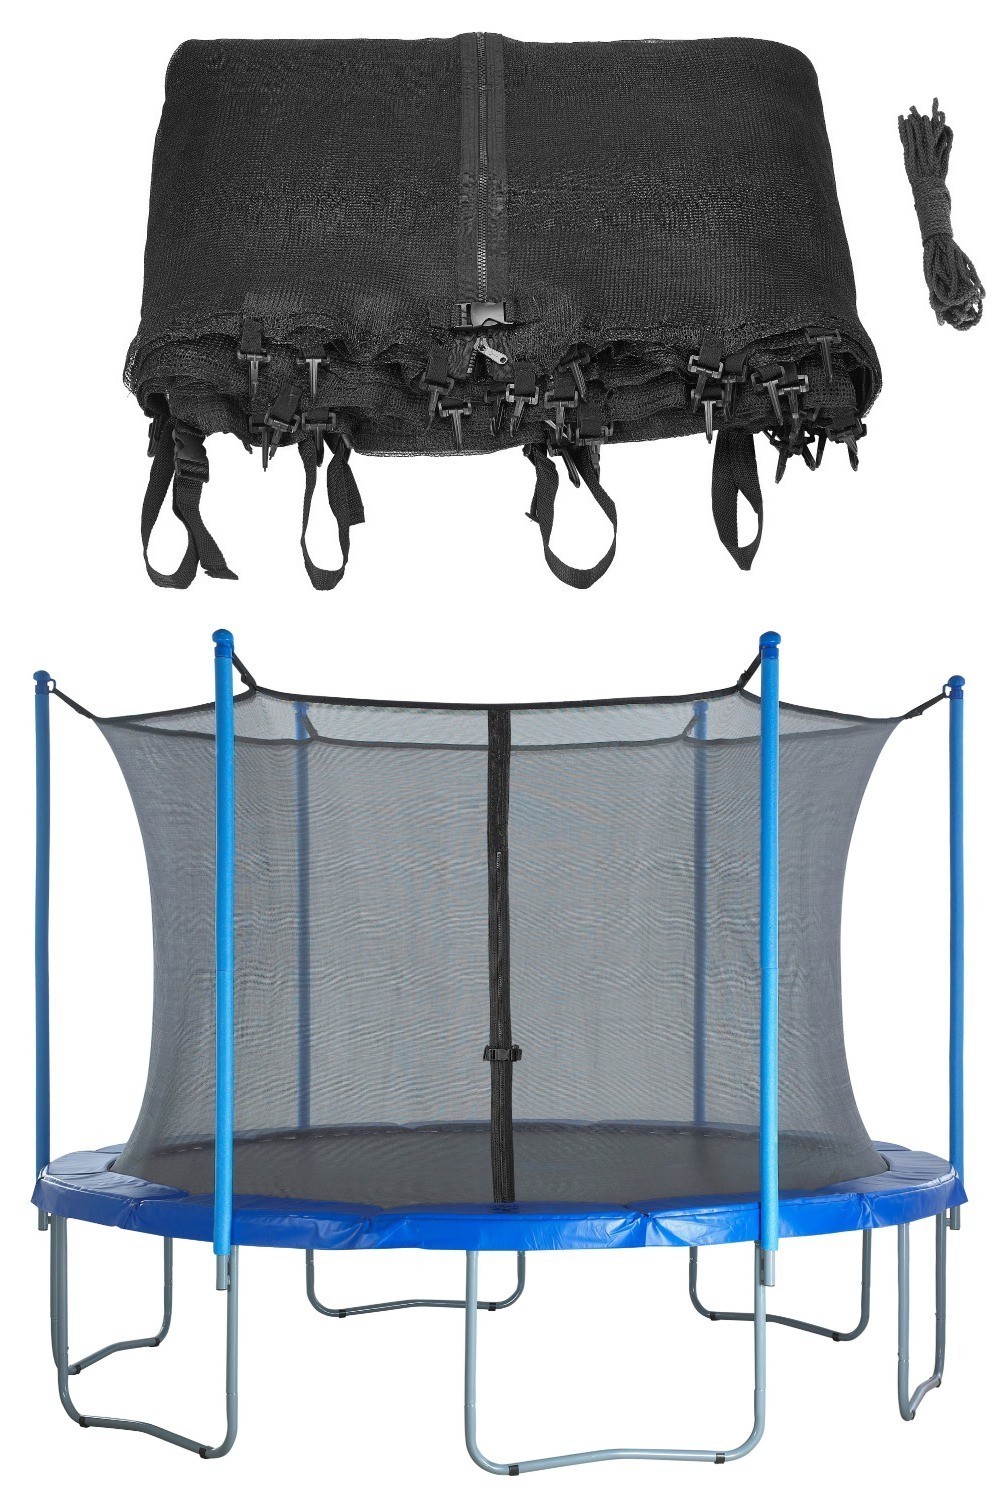 Trampoline Replacement Enclosure Safety Net, fits for 14 FT. Round Frames using 6 Poles or 3 Arches - Net Only